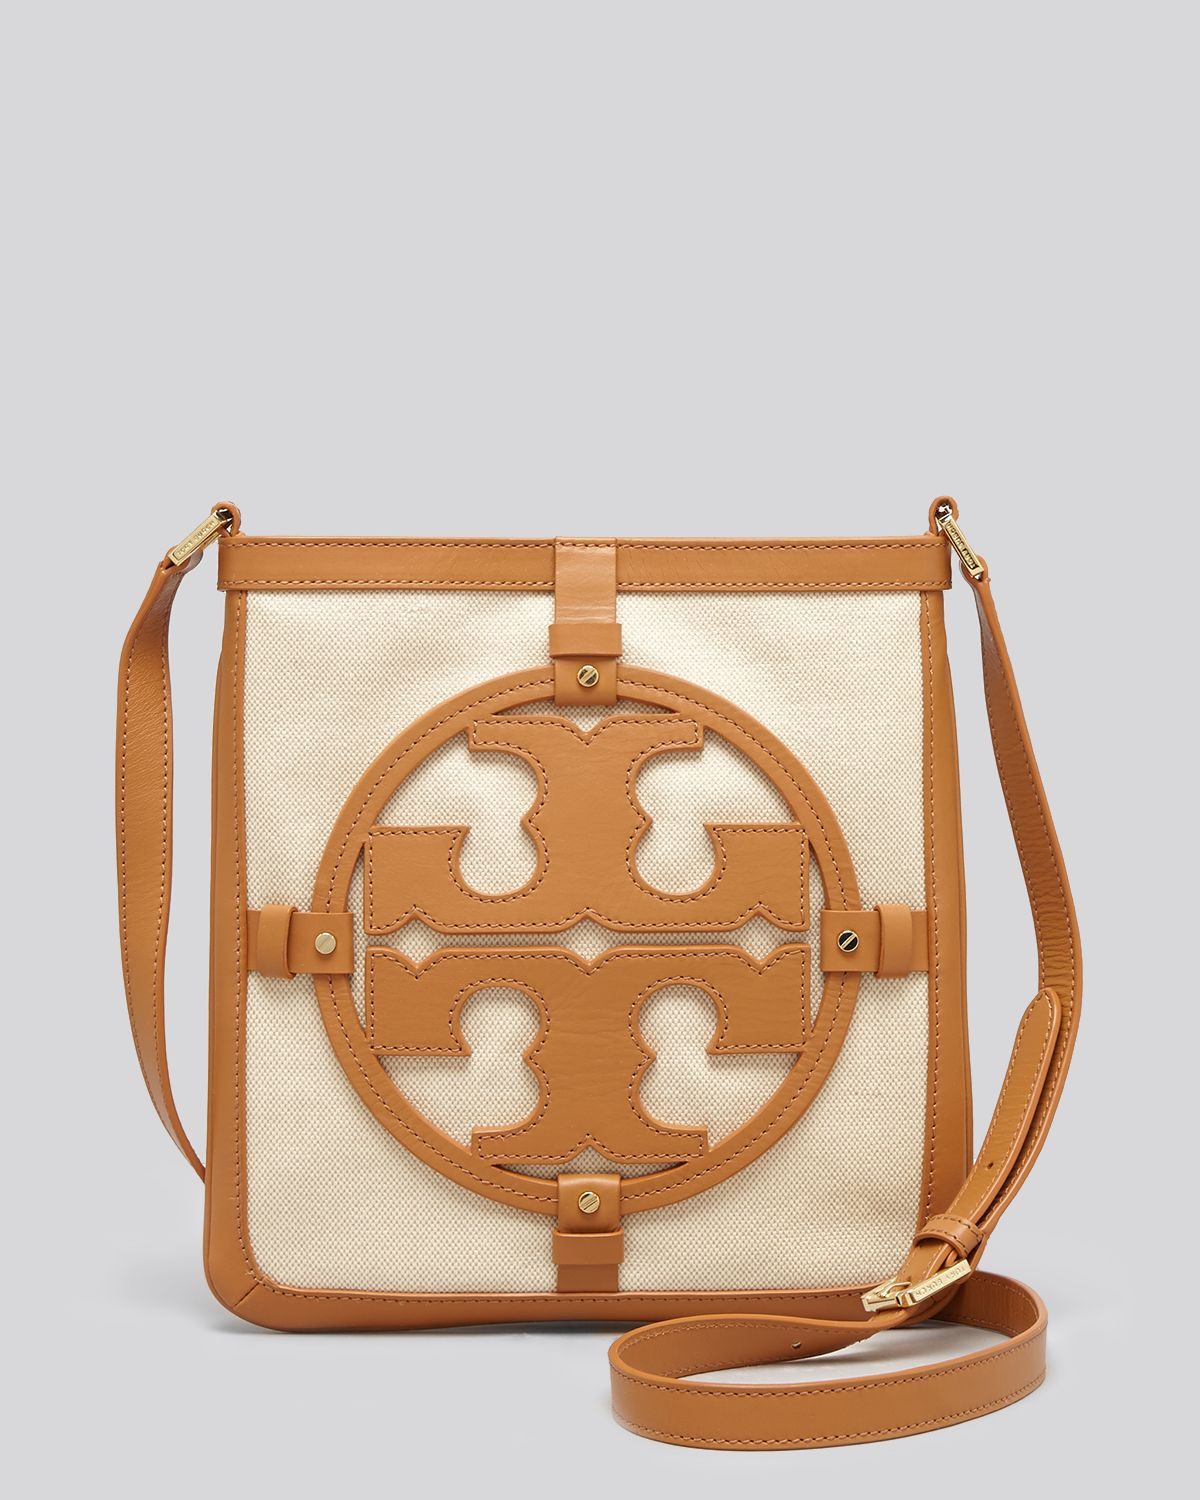 Tory Burch Crossbody Holly Book Bag Messenger in White - Lyst